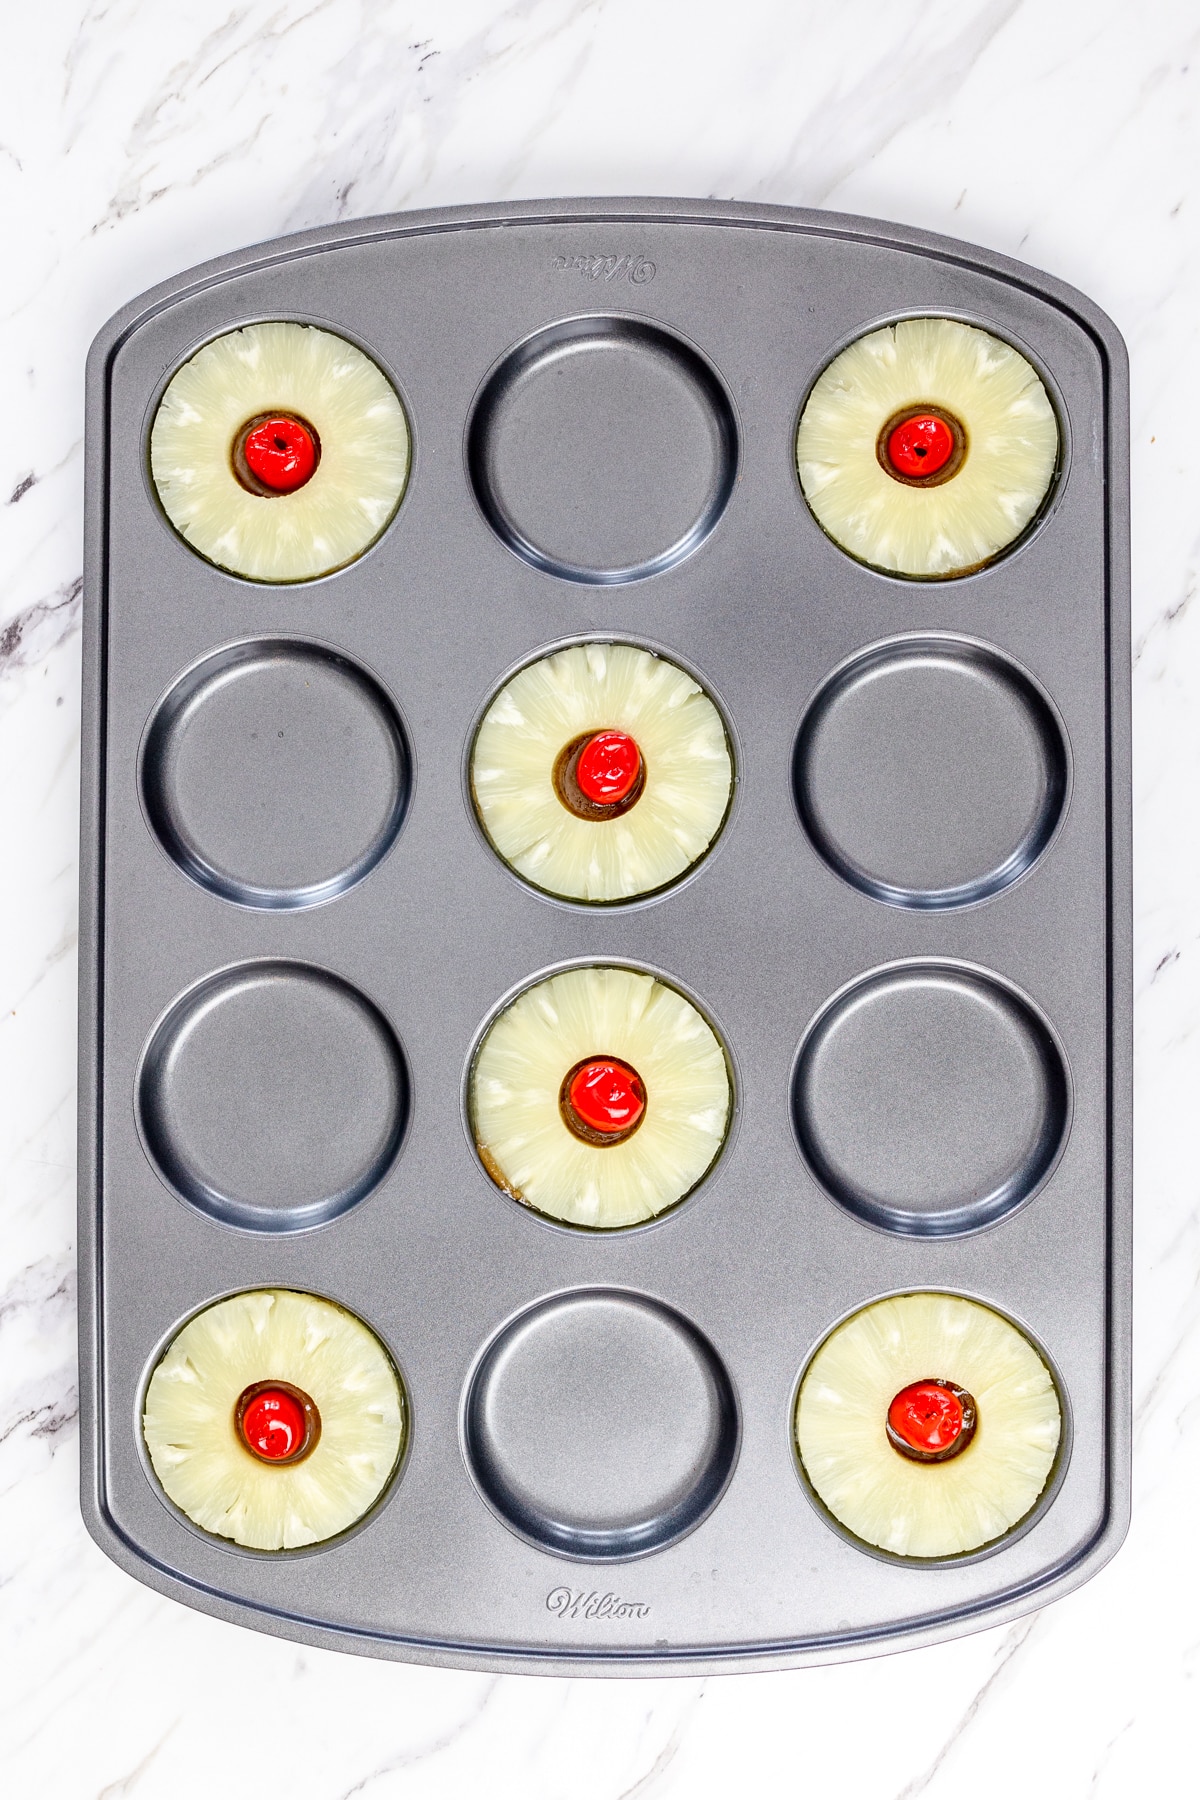 Top view of a muffin top baking tray with pineapple rings in the cups and maraschimo cherries in the middle of them.